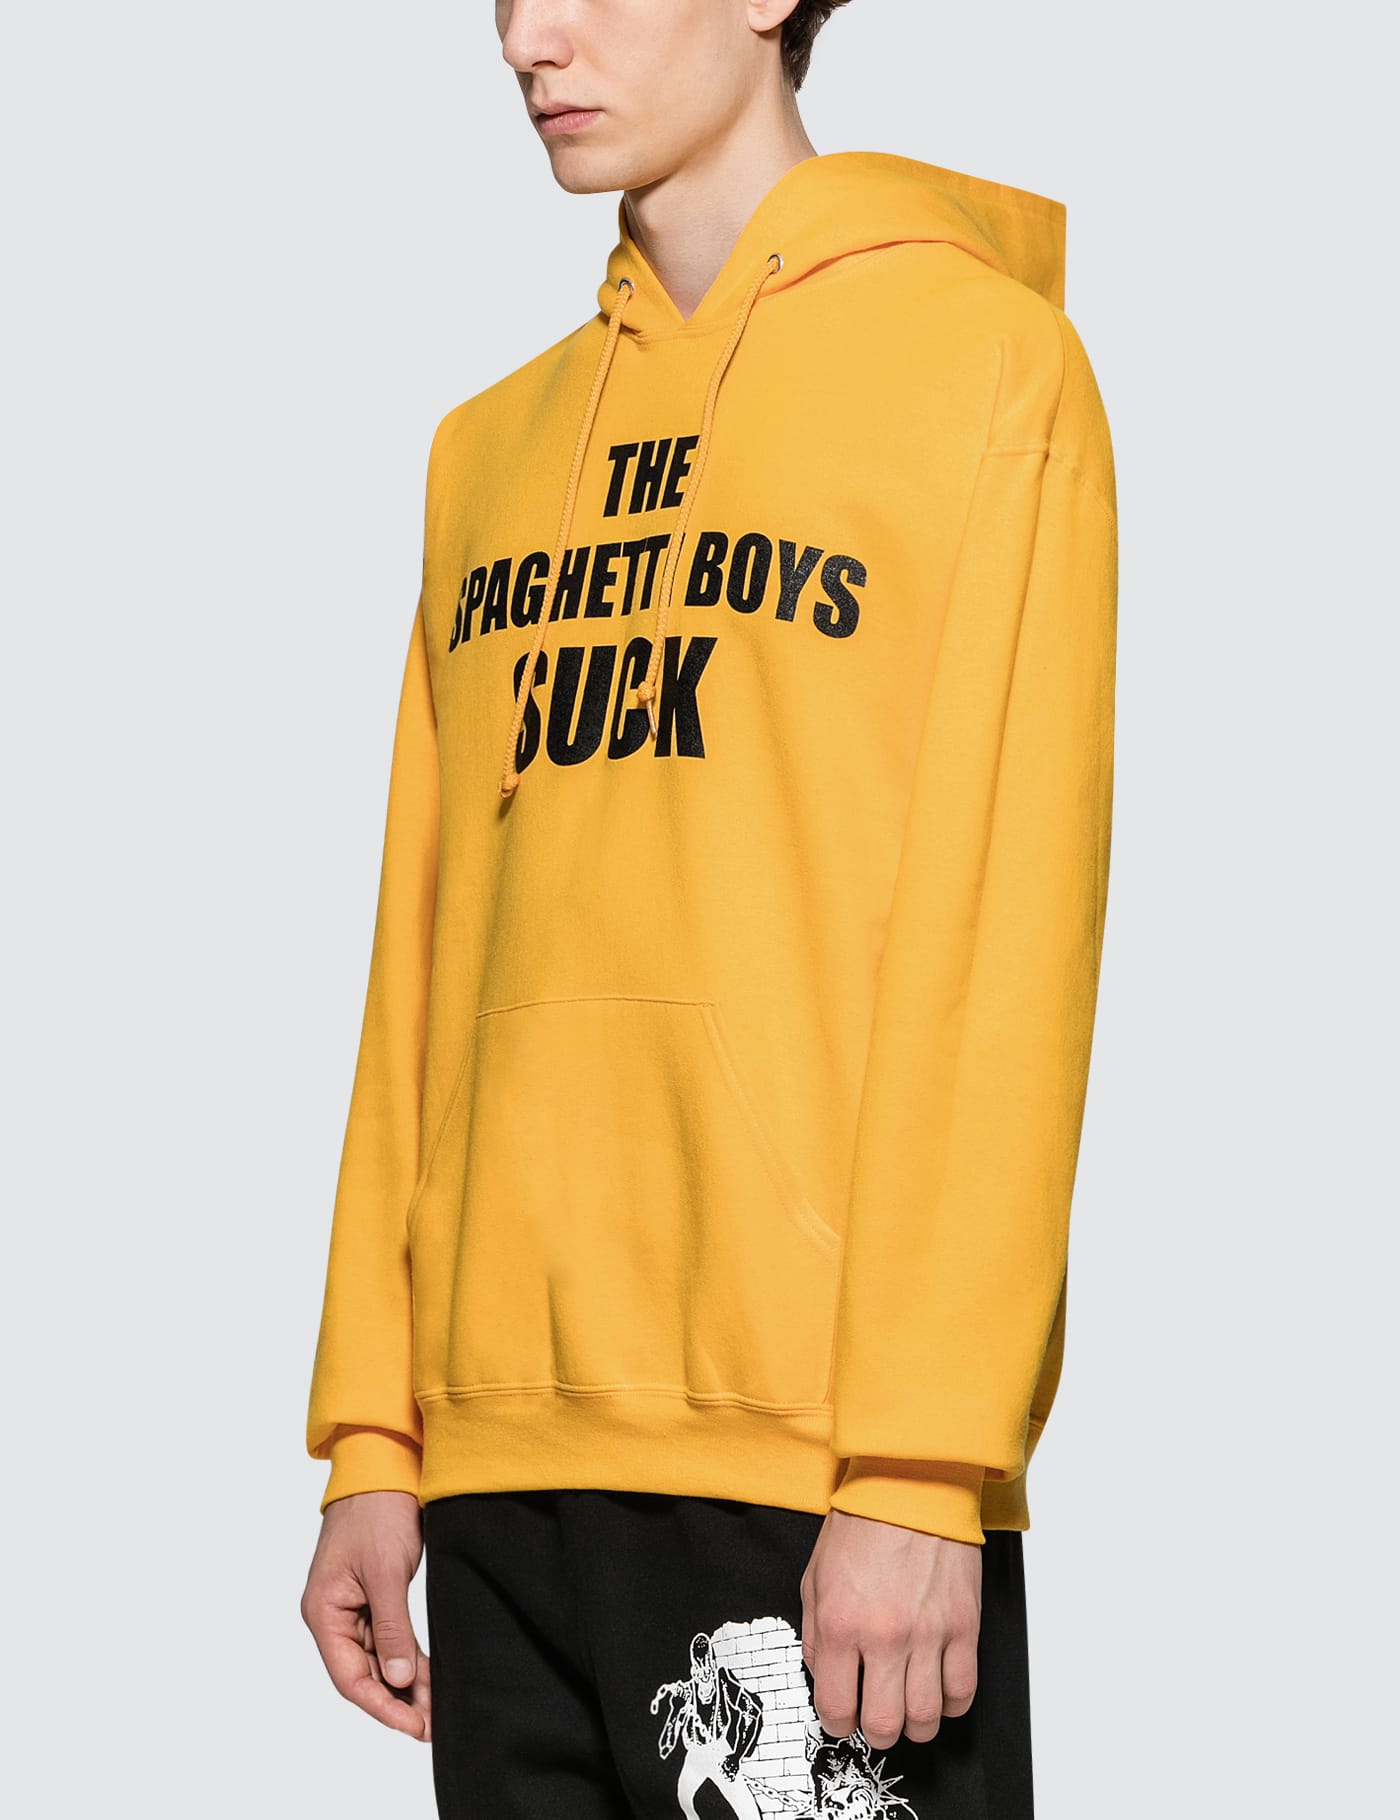 Spaghetti Boys - Suck Hoodie | HBX - Globally Curated Fashion and 